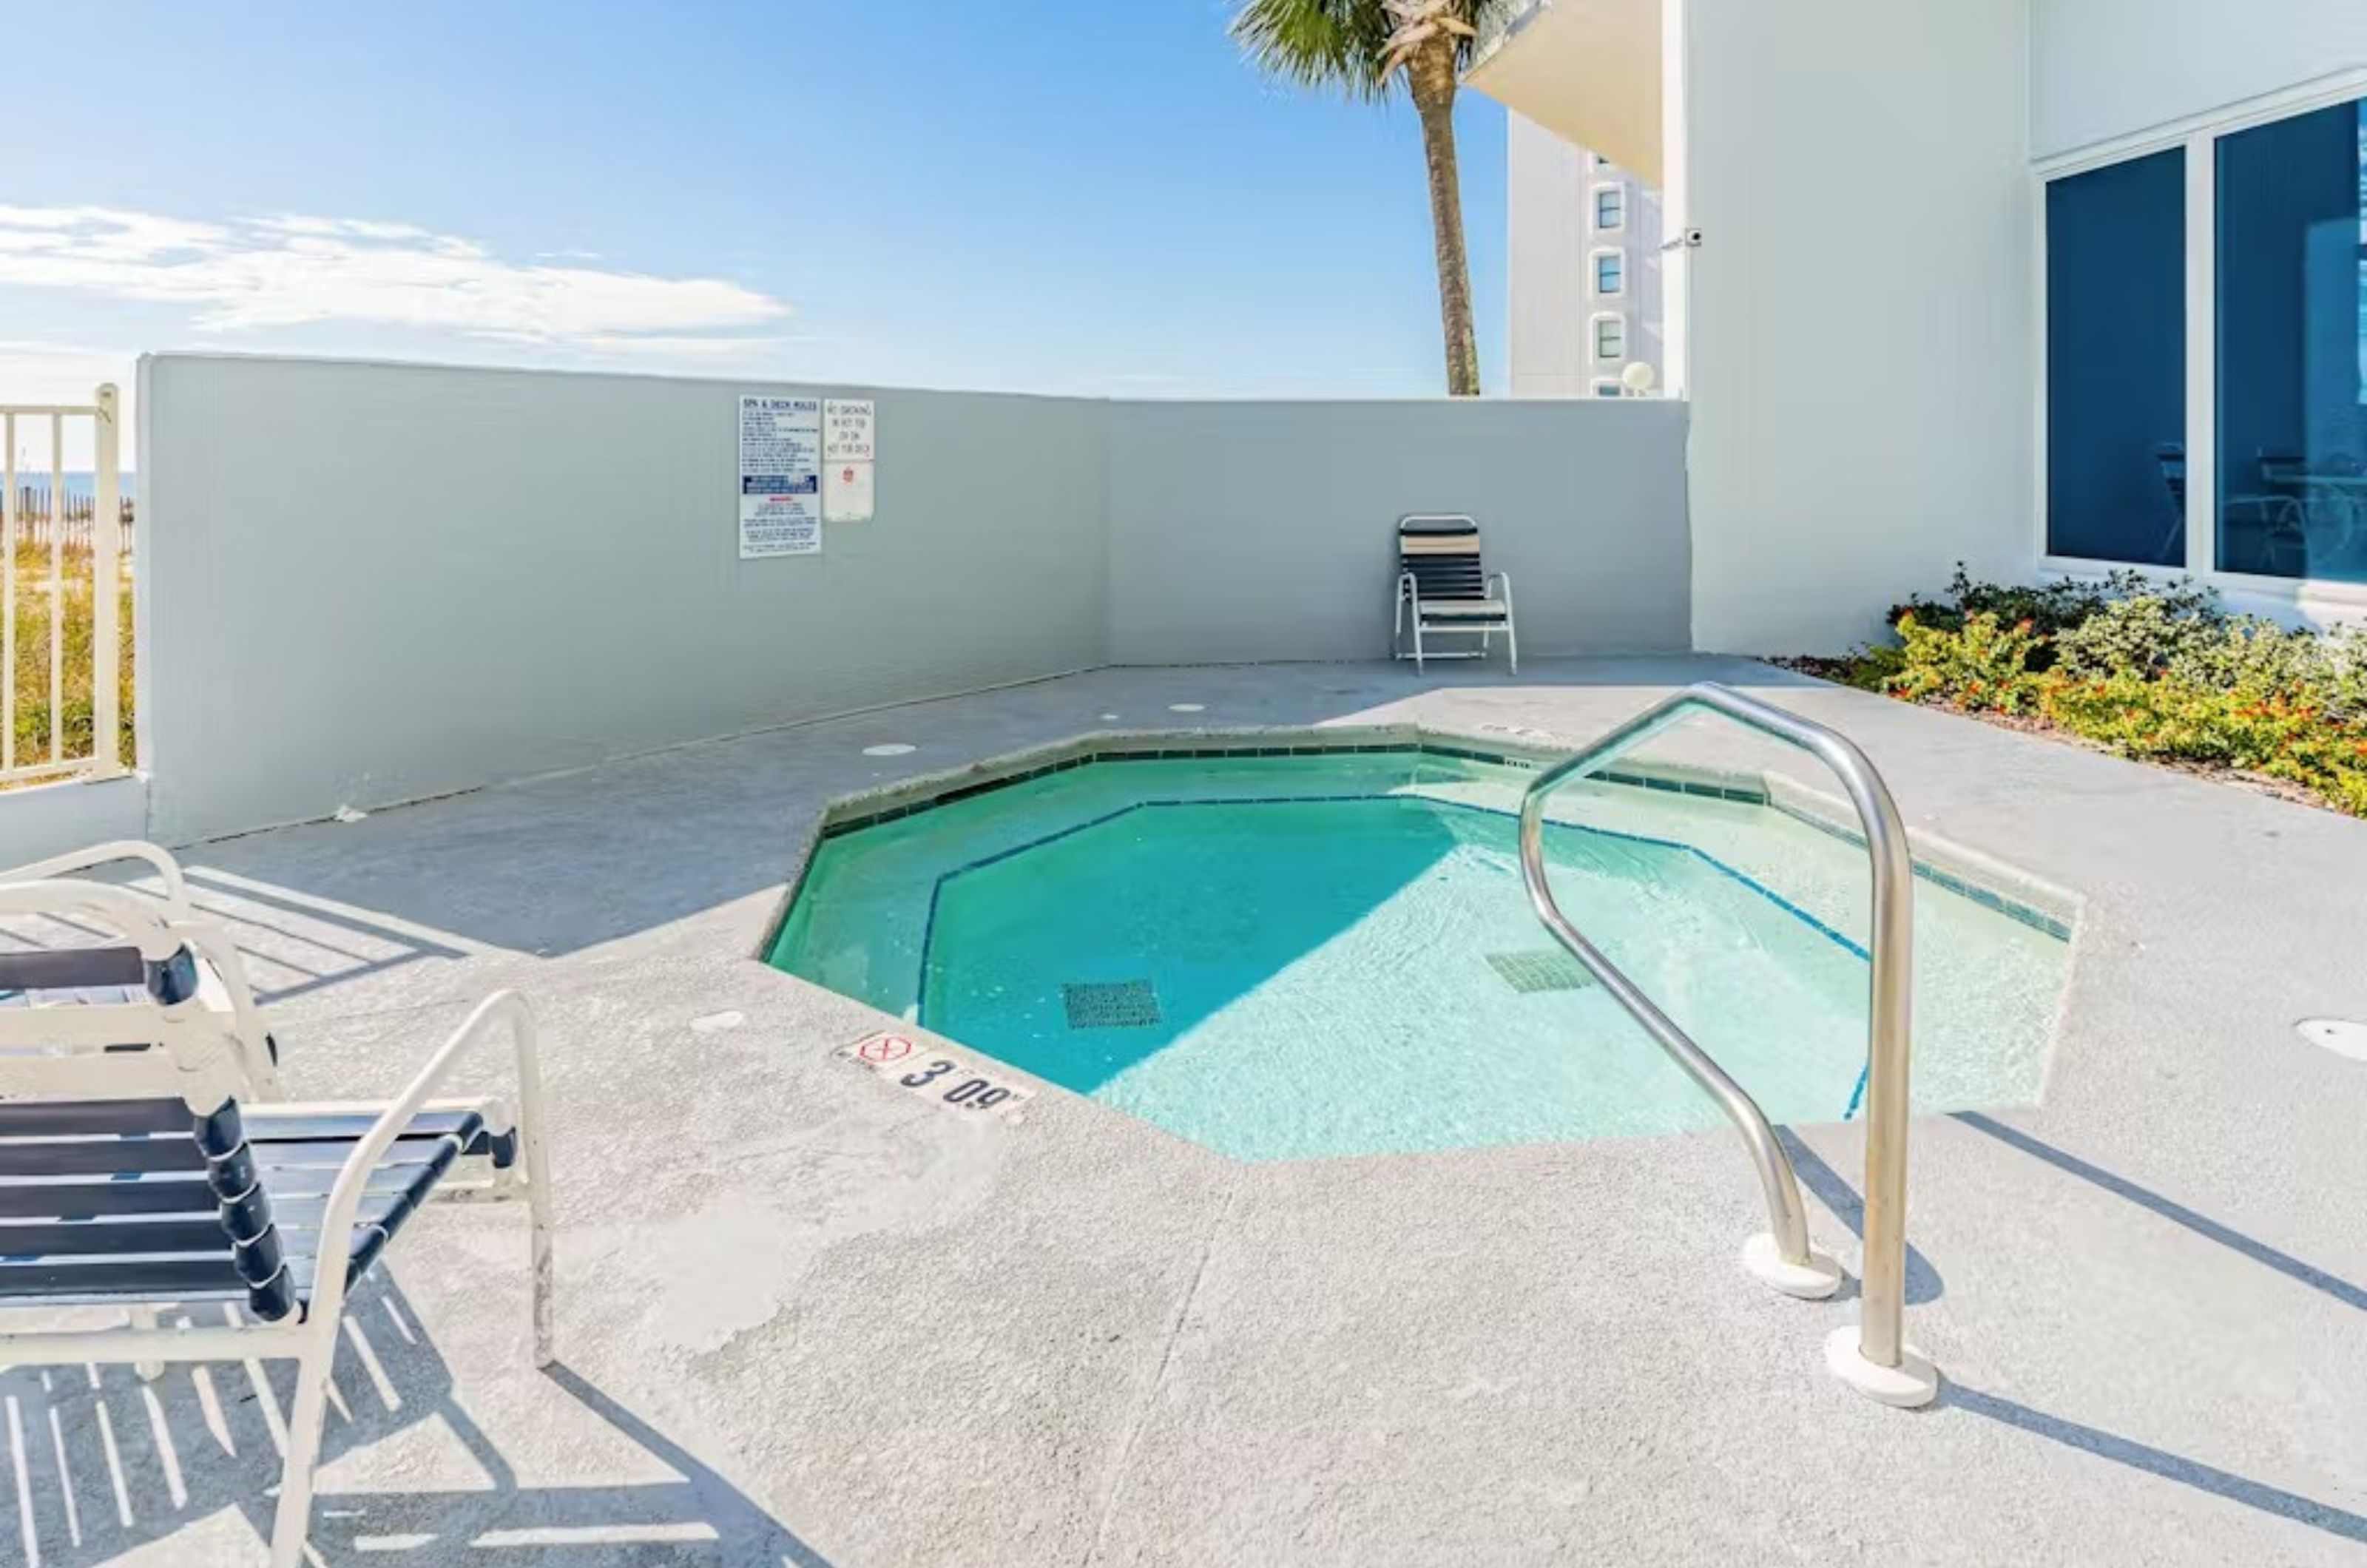 The outdoor hot tub at Lighthouse Condominiums